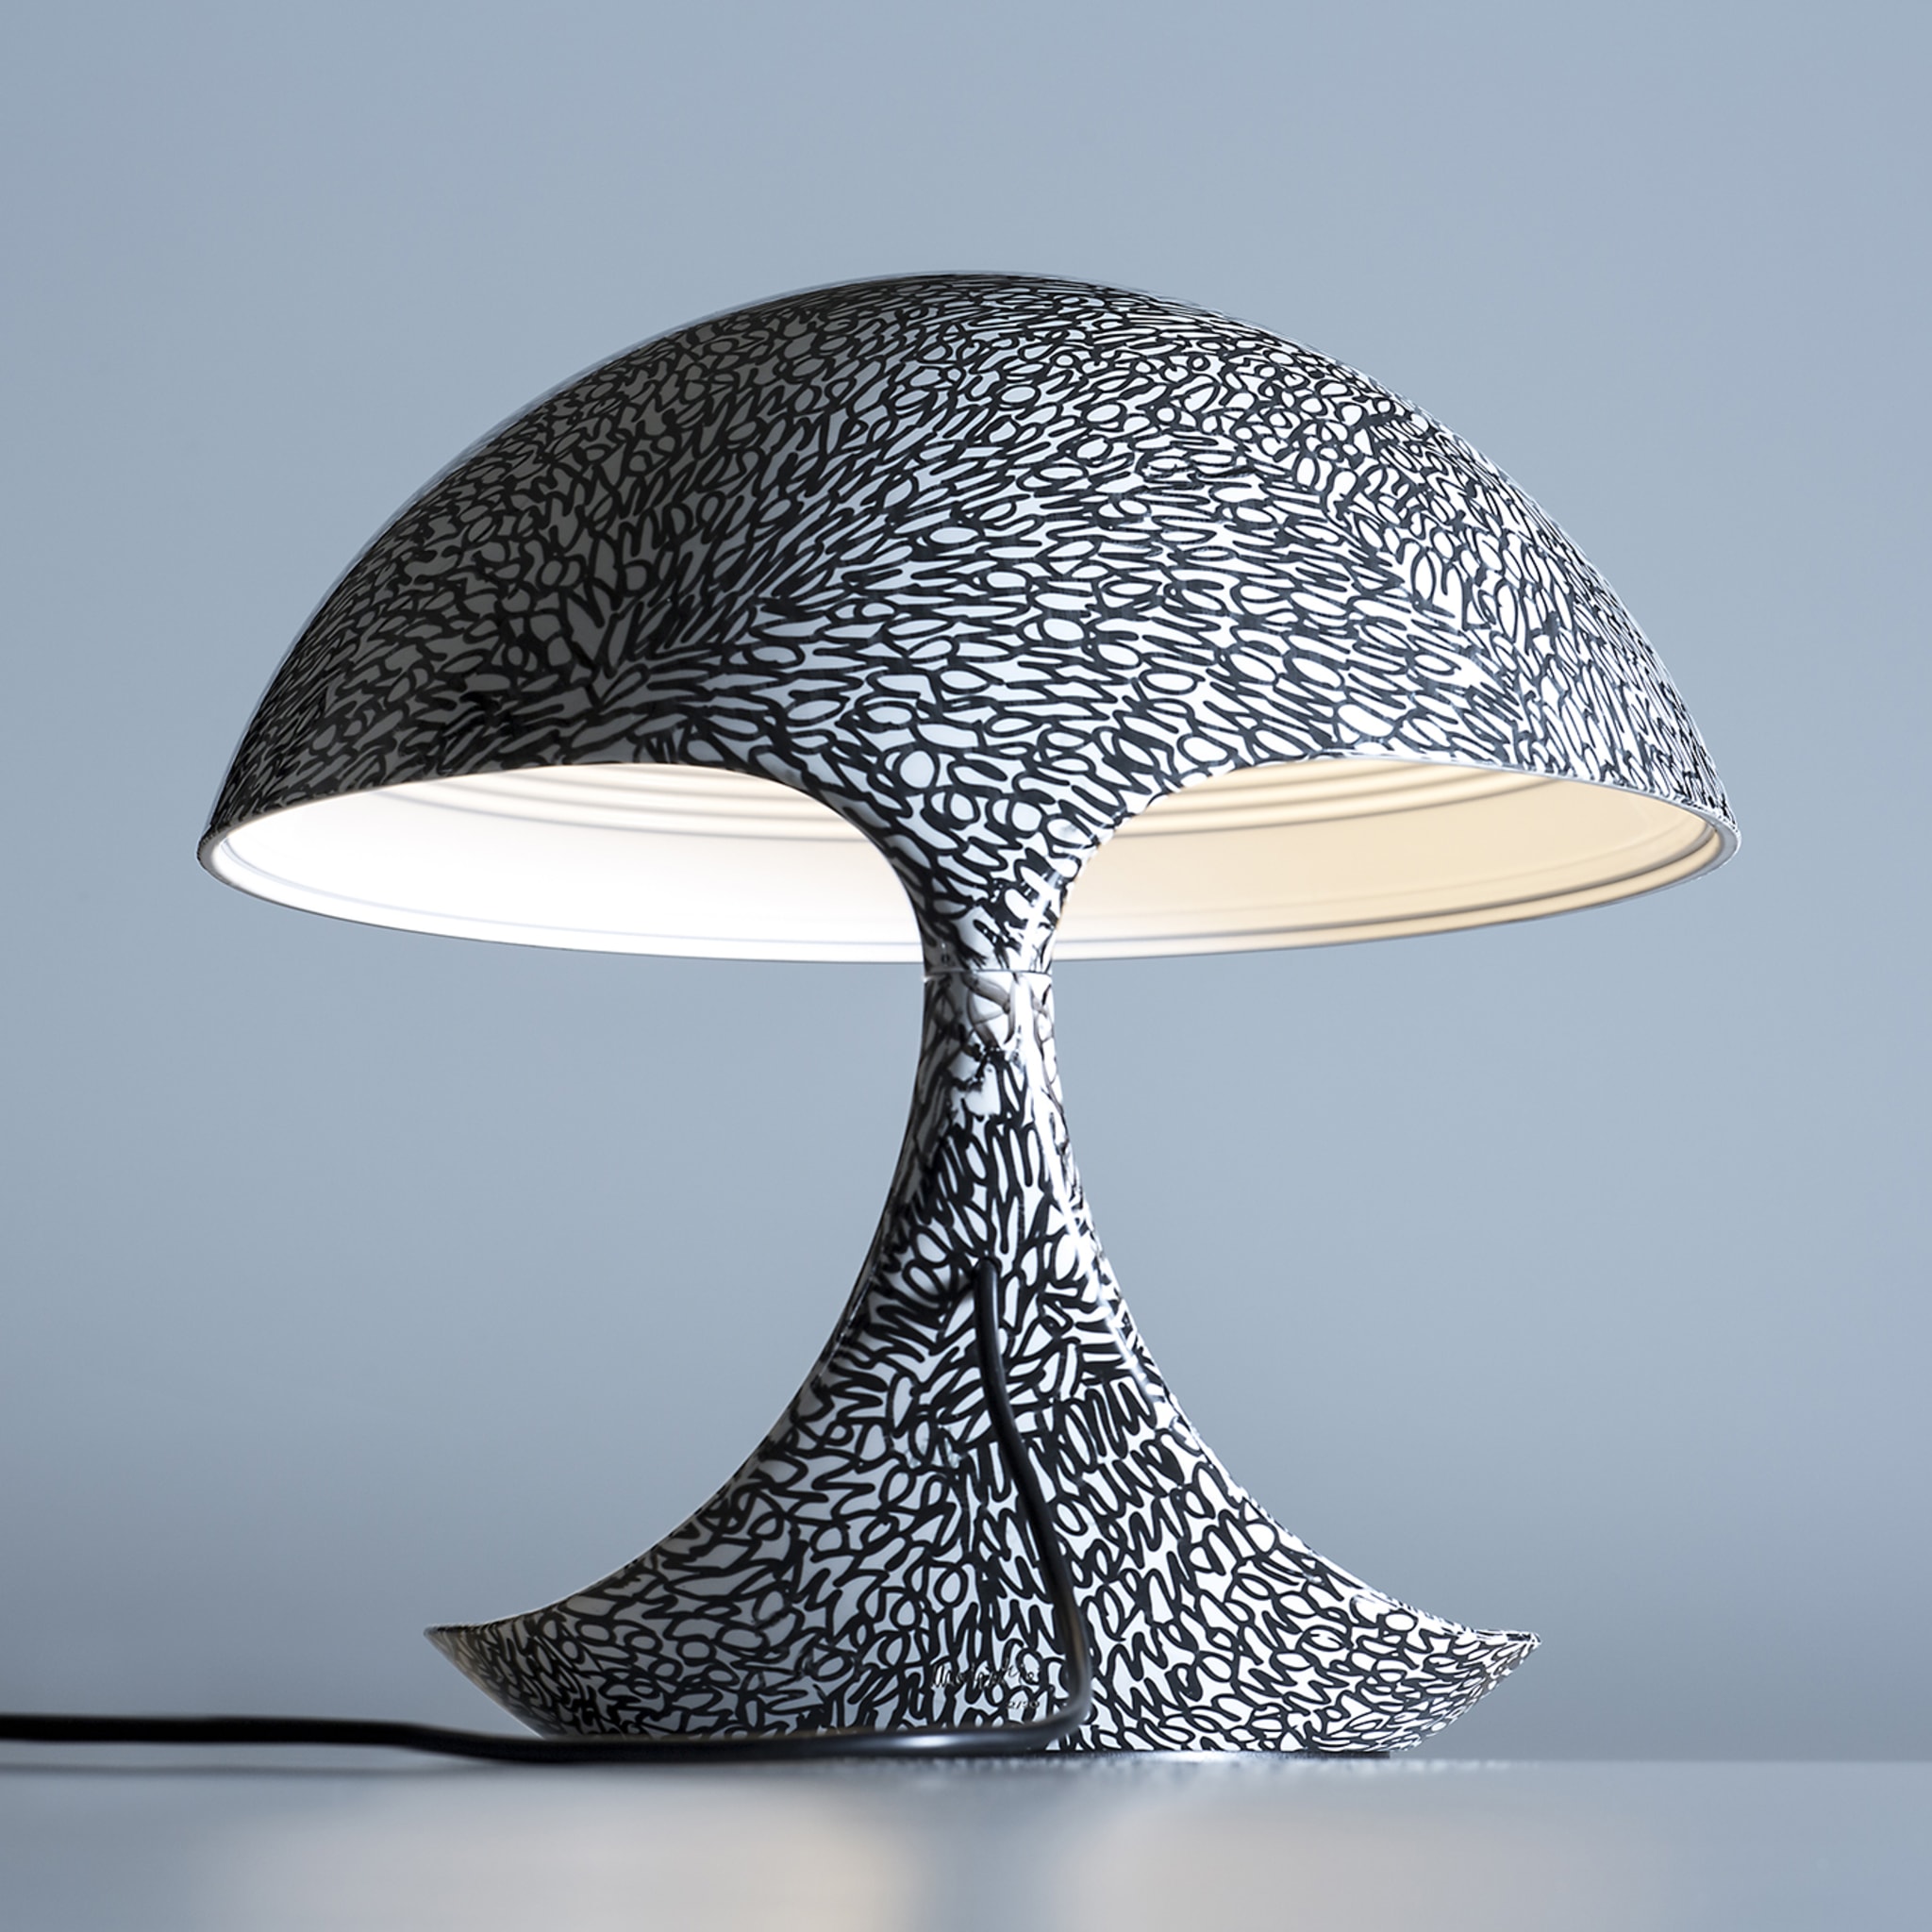 Cobra Texture Black-And-White Table Lamp by A. Femia & A. Simony - Alternative view 4